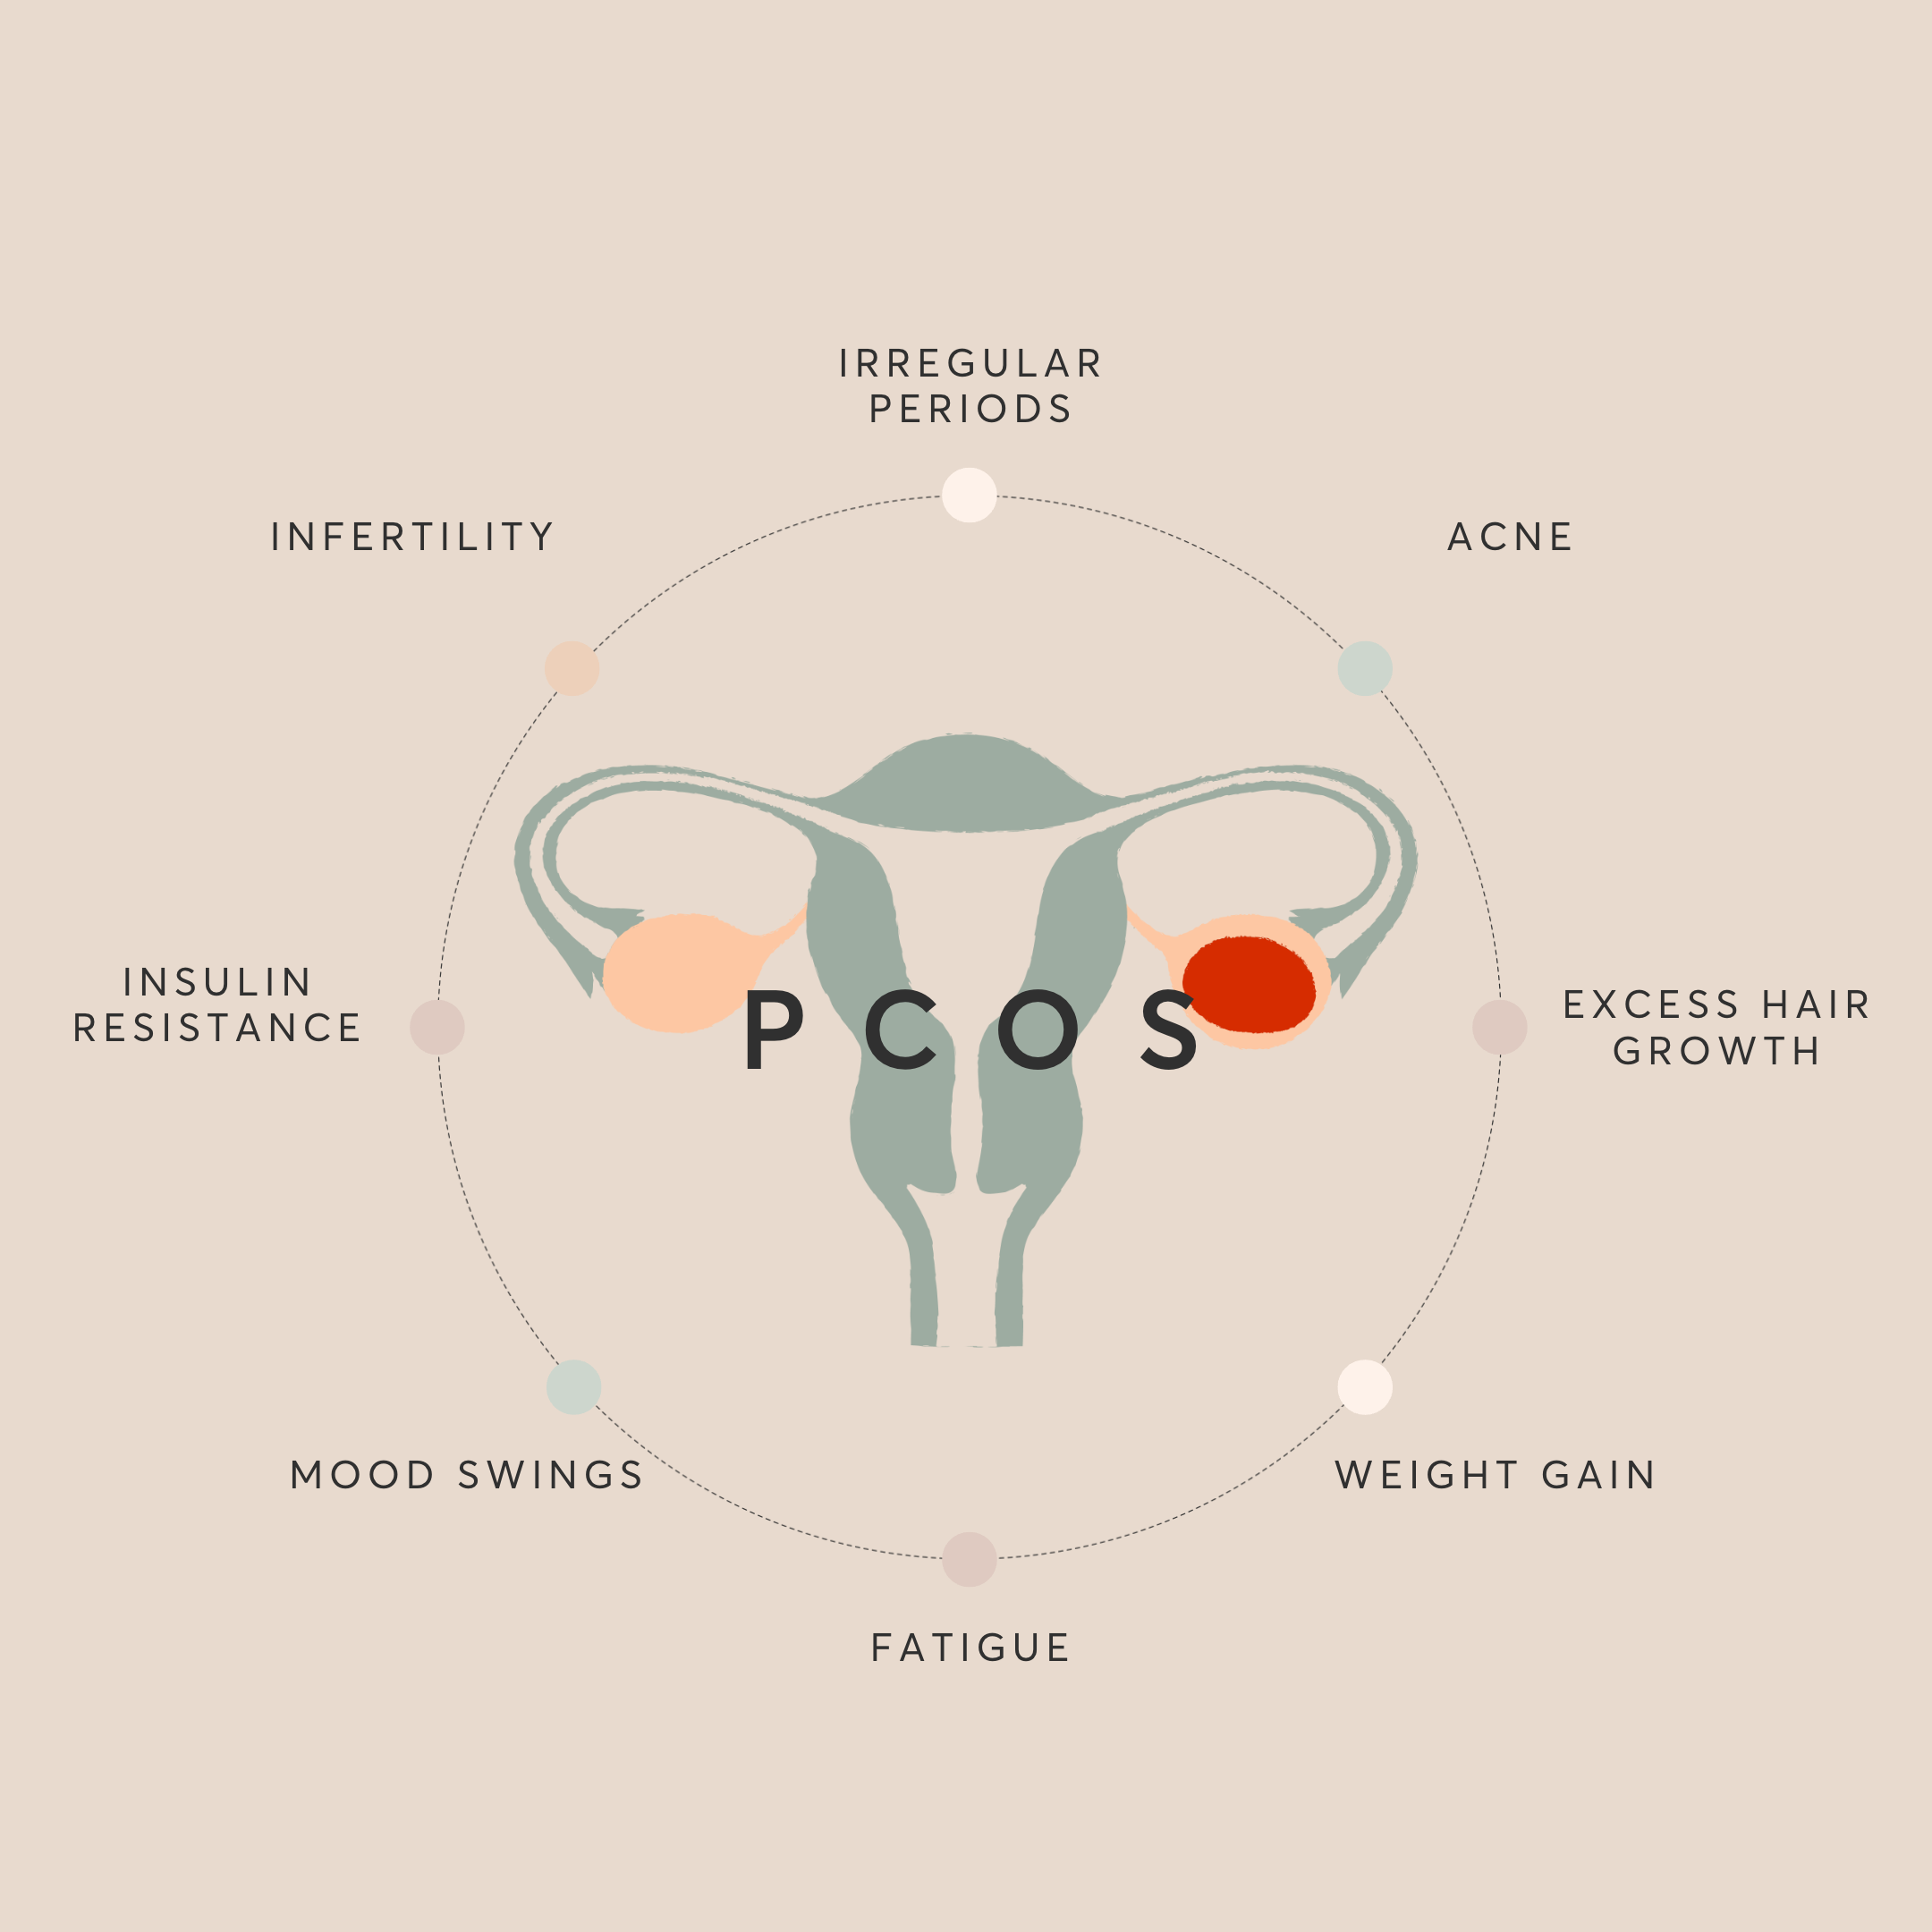 Conceiving with PCOS: Lifestyle and Nutrition Advice